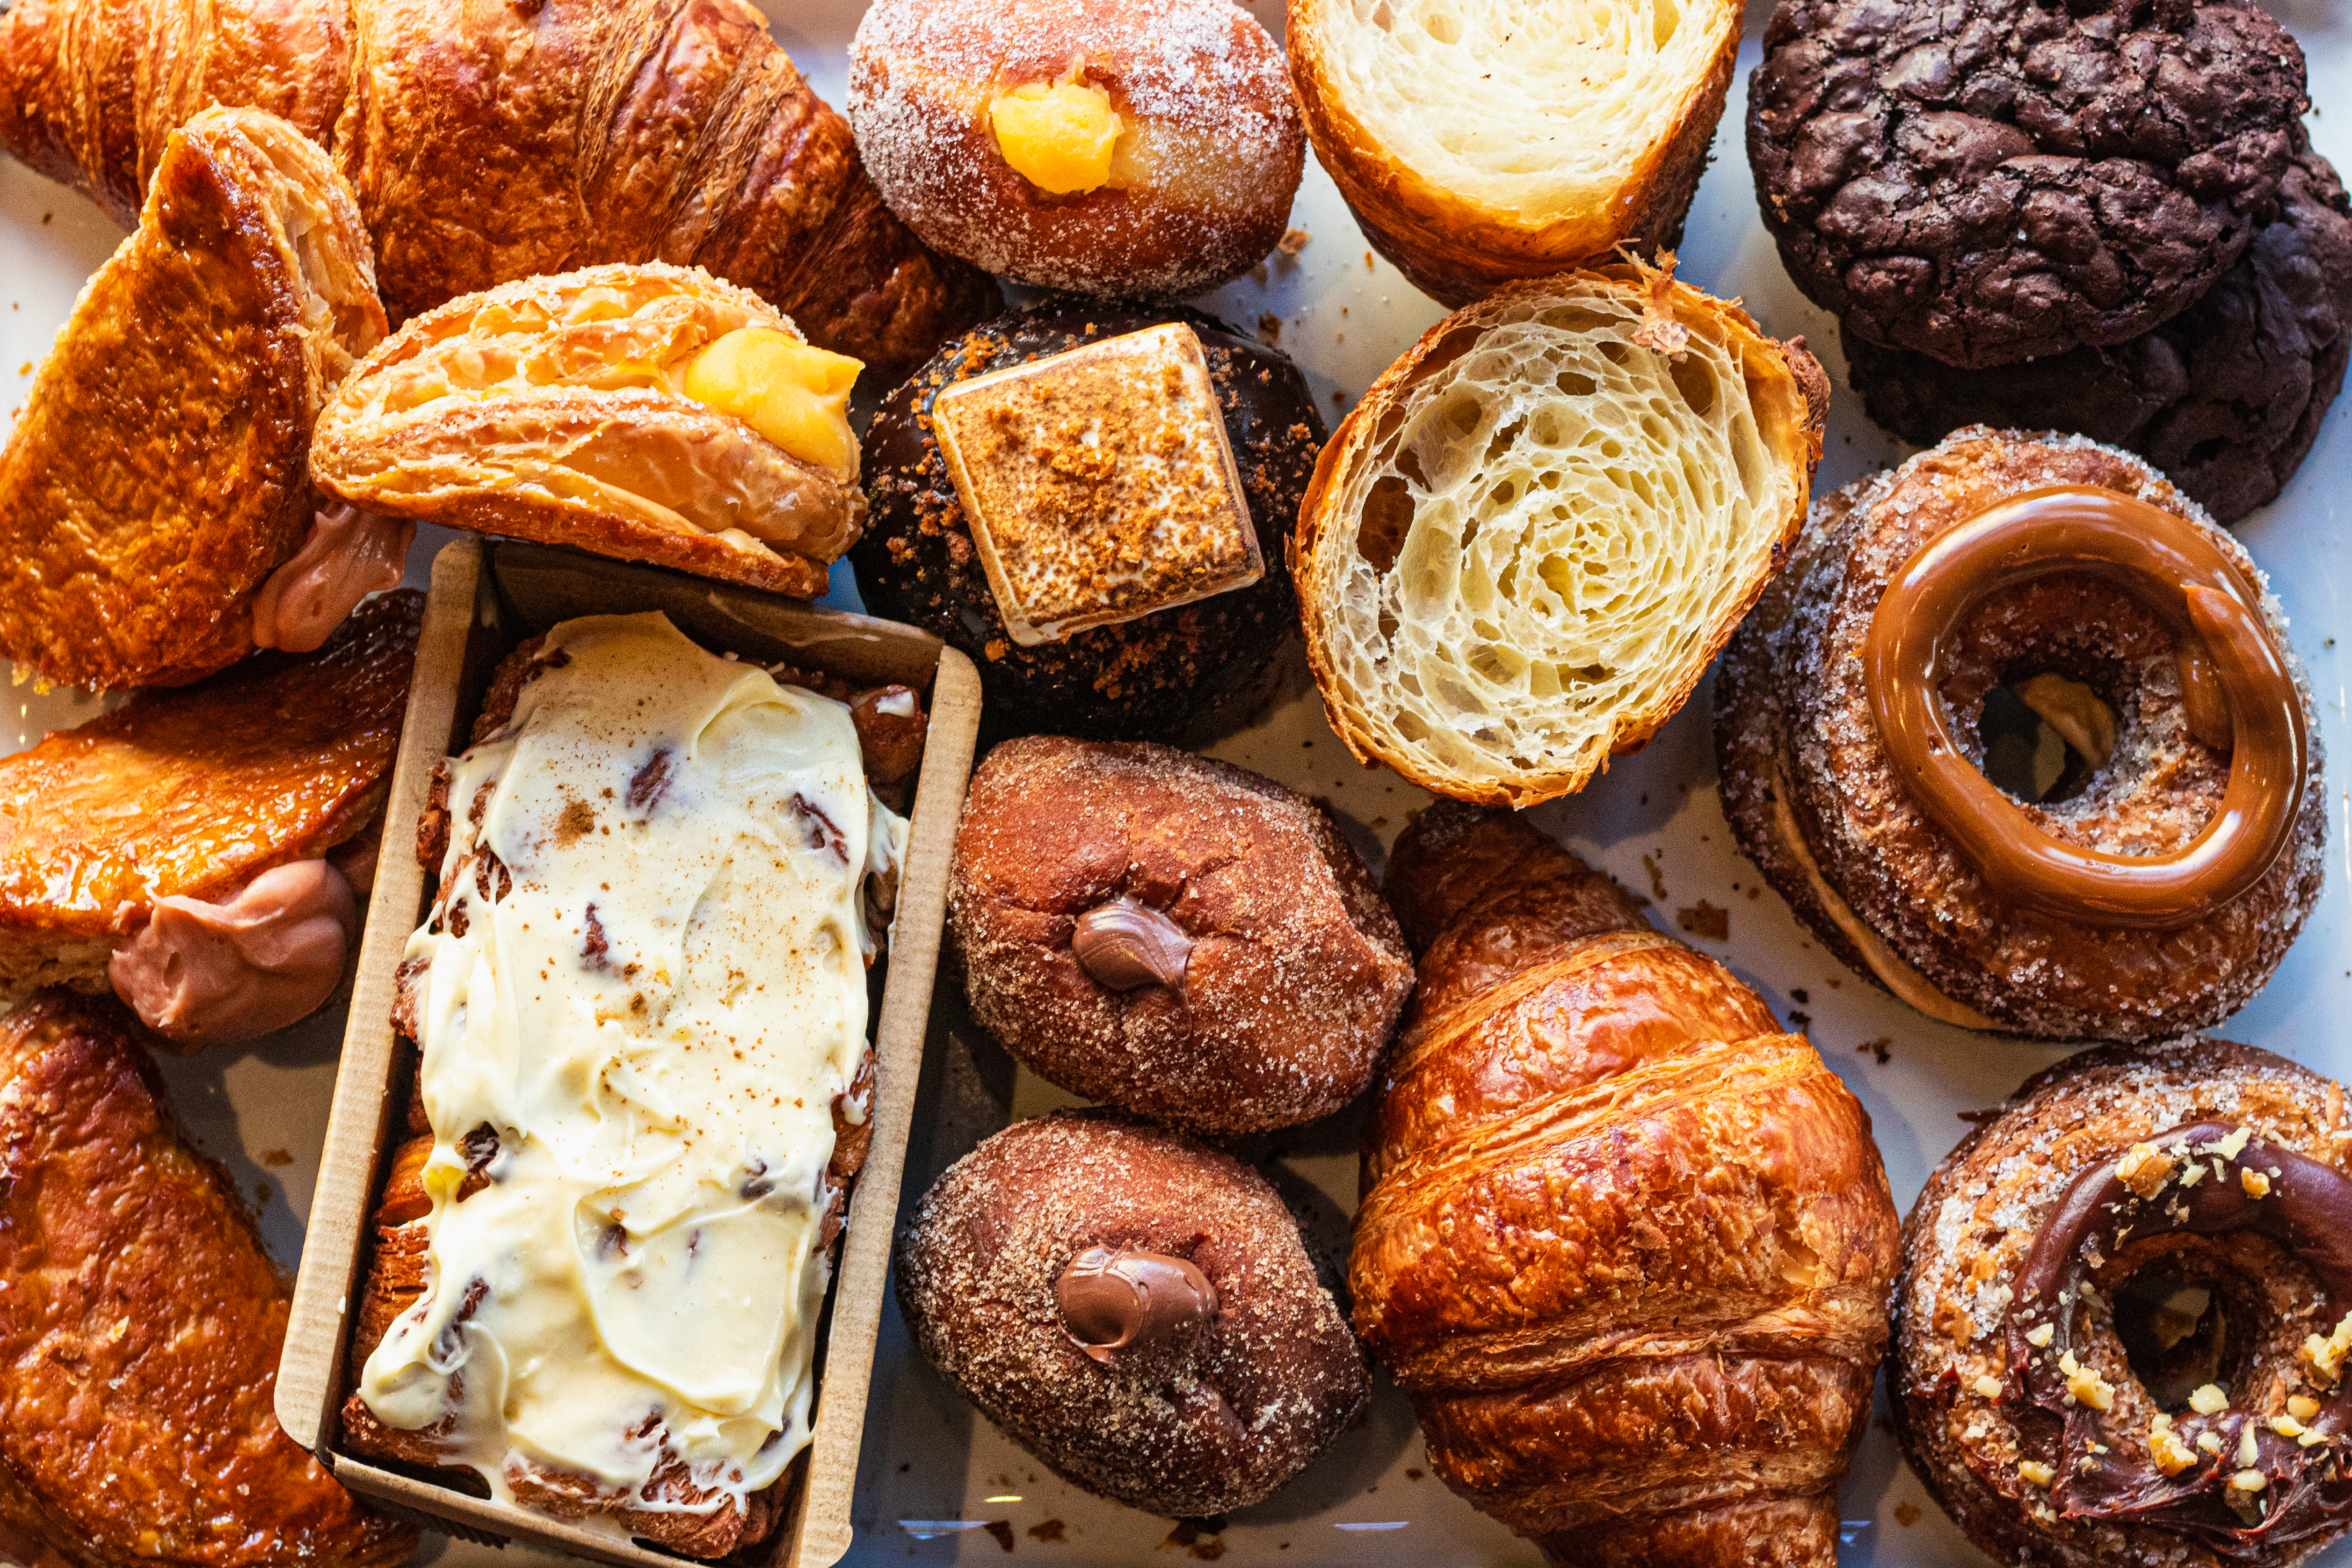 One (1) Free Pastry at Wildflour Cafe + Bakery